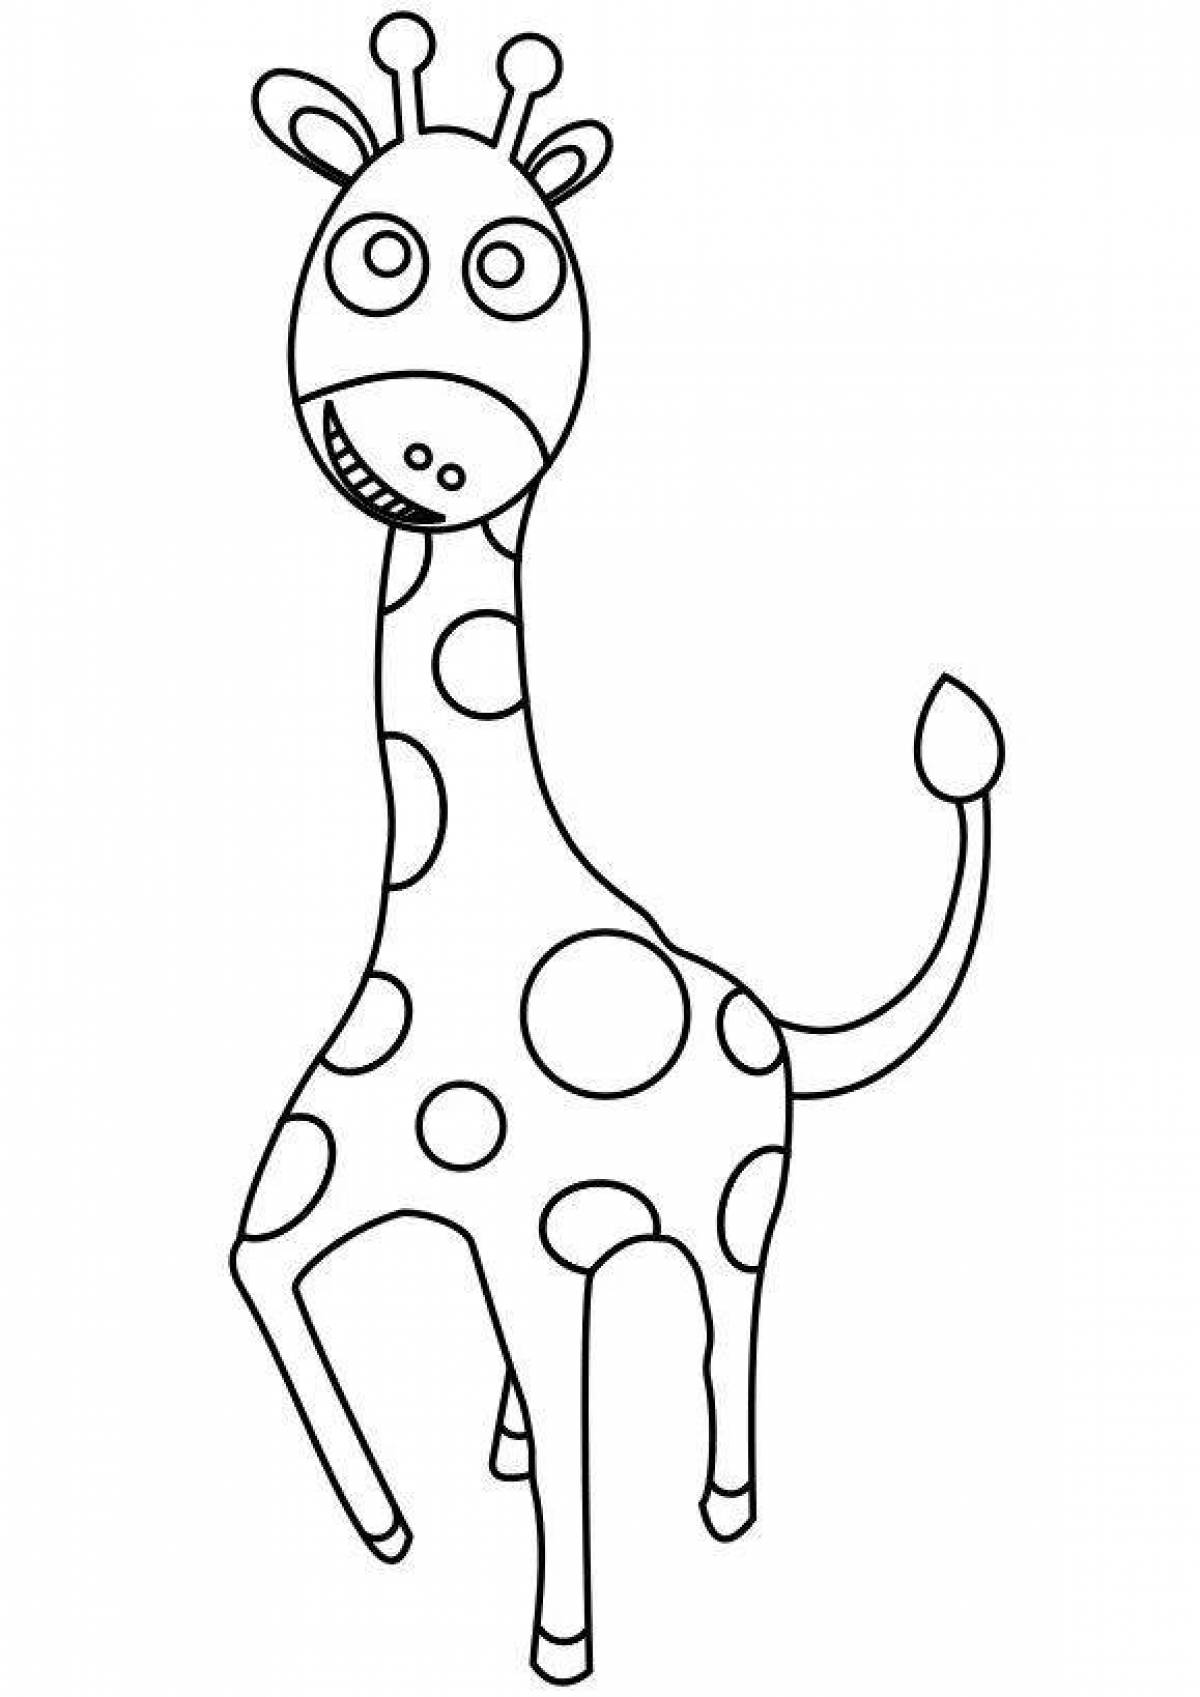 Outstanding giraffe coloring page for kids